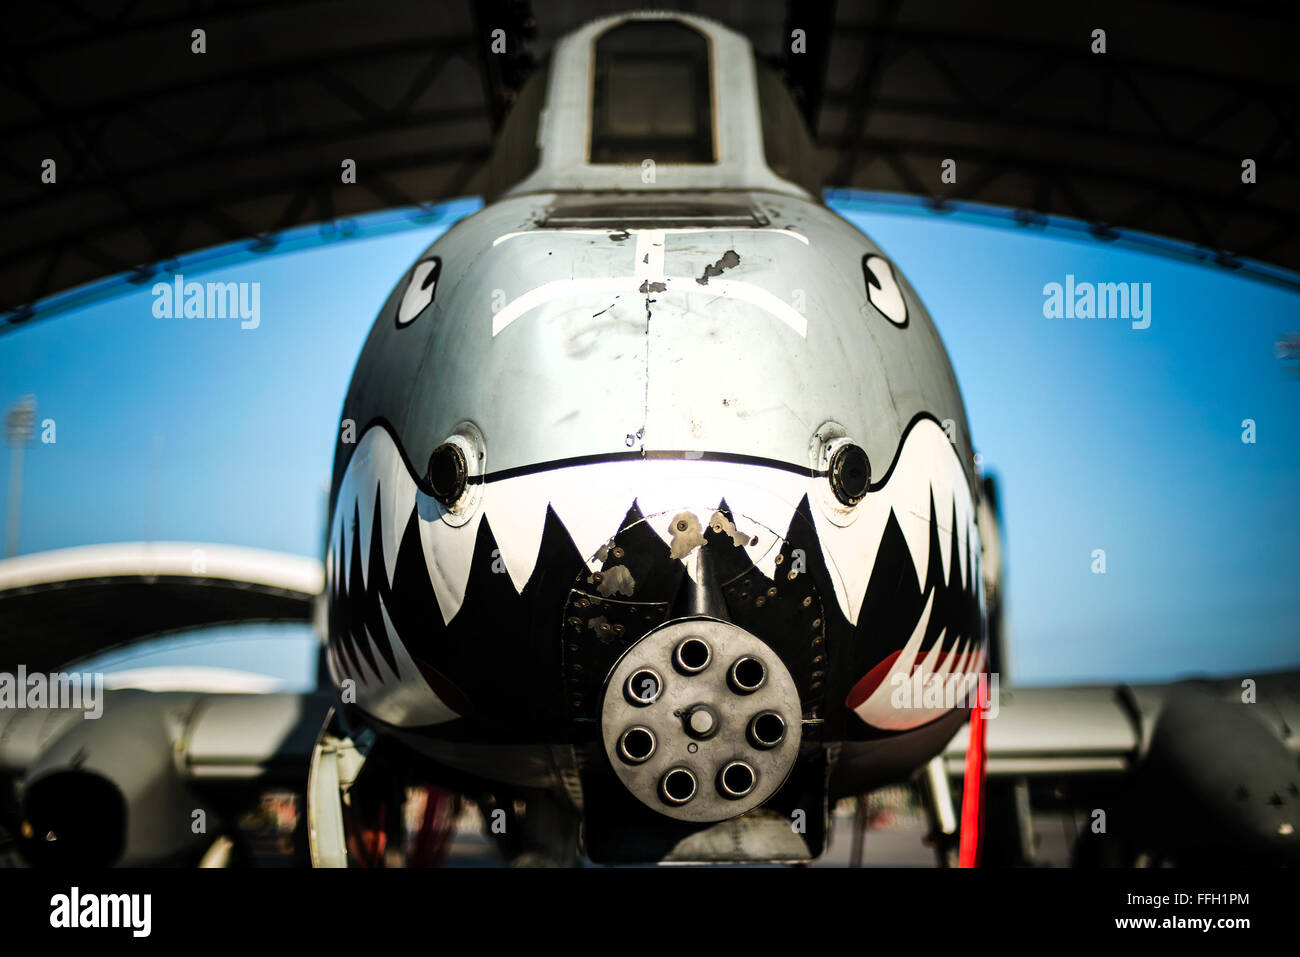 An A-10C Thunderbolt II sits under a sun shade at Moody Air Force Base, Ga. The A-10Õs primary weapon is a single 30mm GAU-8/A seven-barrel Gatling gun. It can also carry up to 16,000 pounds of mixed ordnance such as cluster bomb units, joint direct attack munitions and AIM-9 Sidewinder missiles. Stock Photo